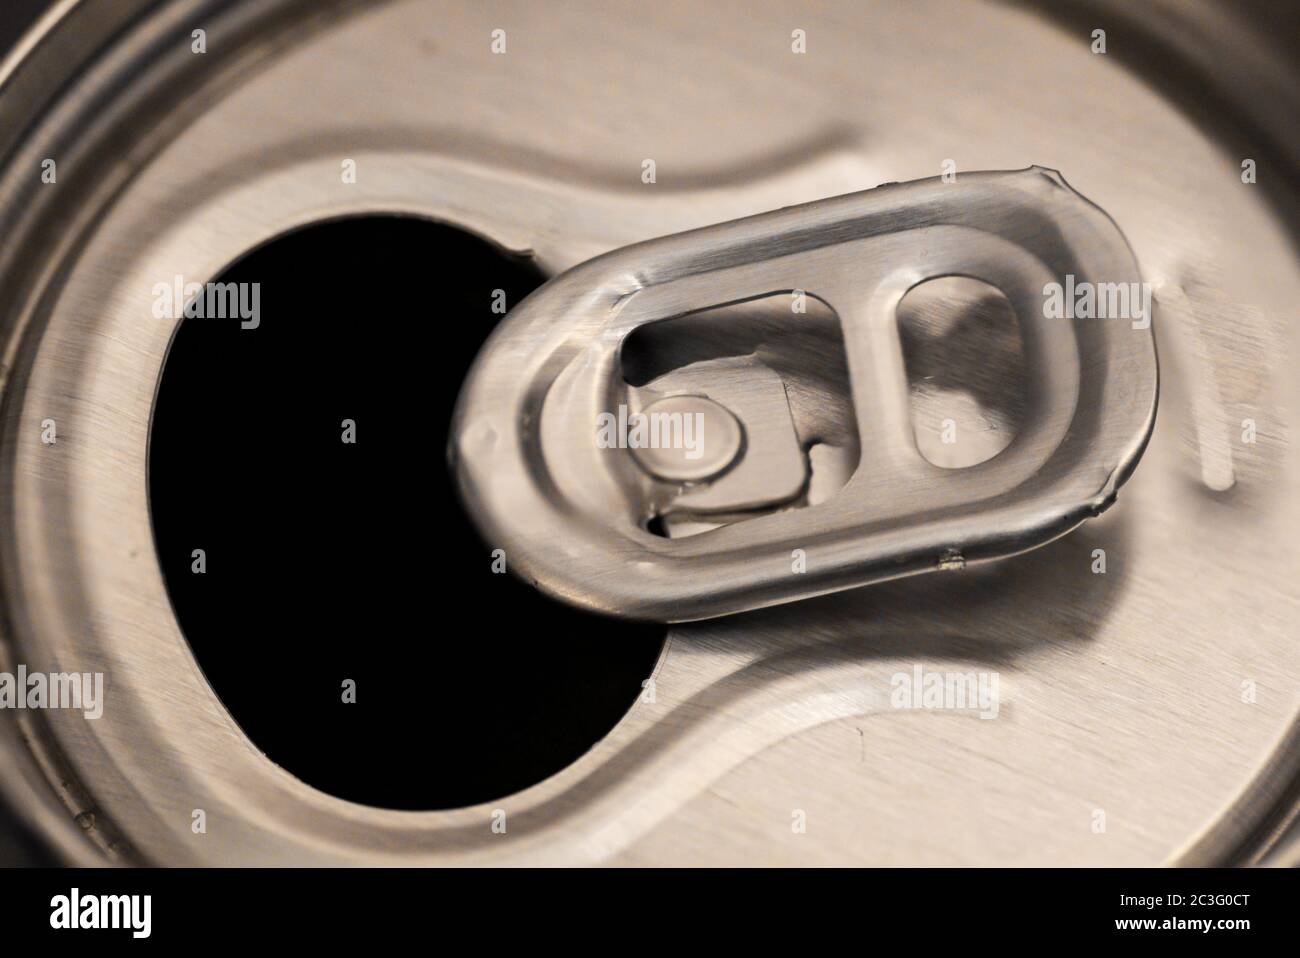 The lid of an aluminum beverage can from above. Stock Photo